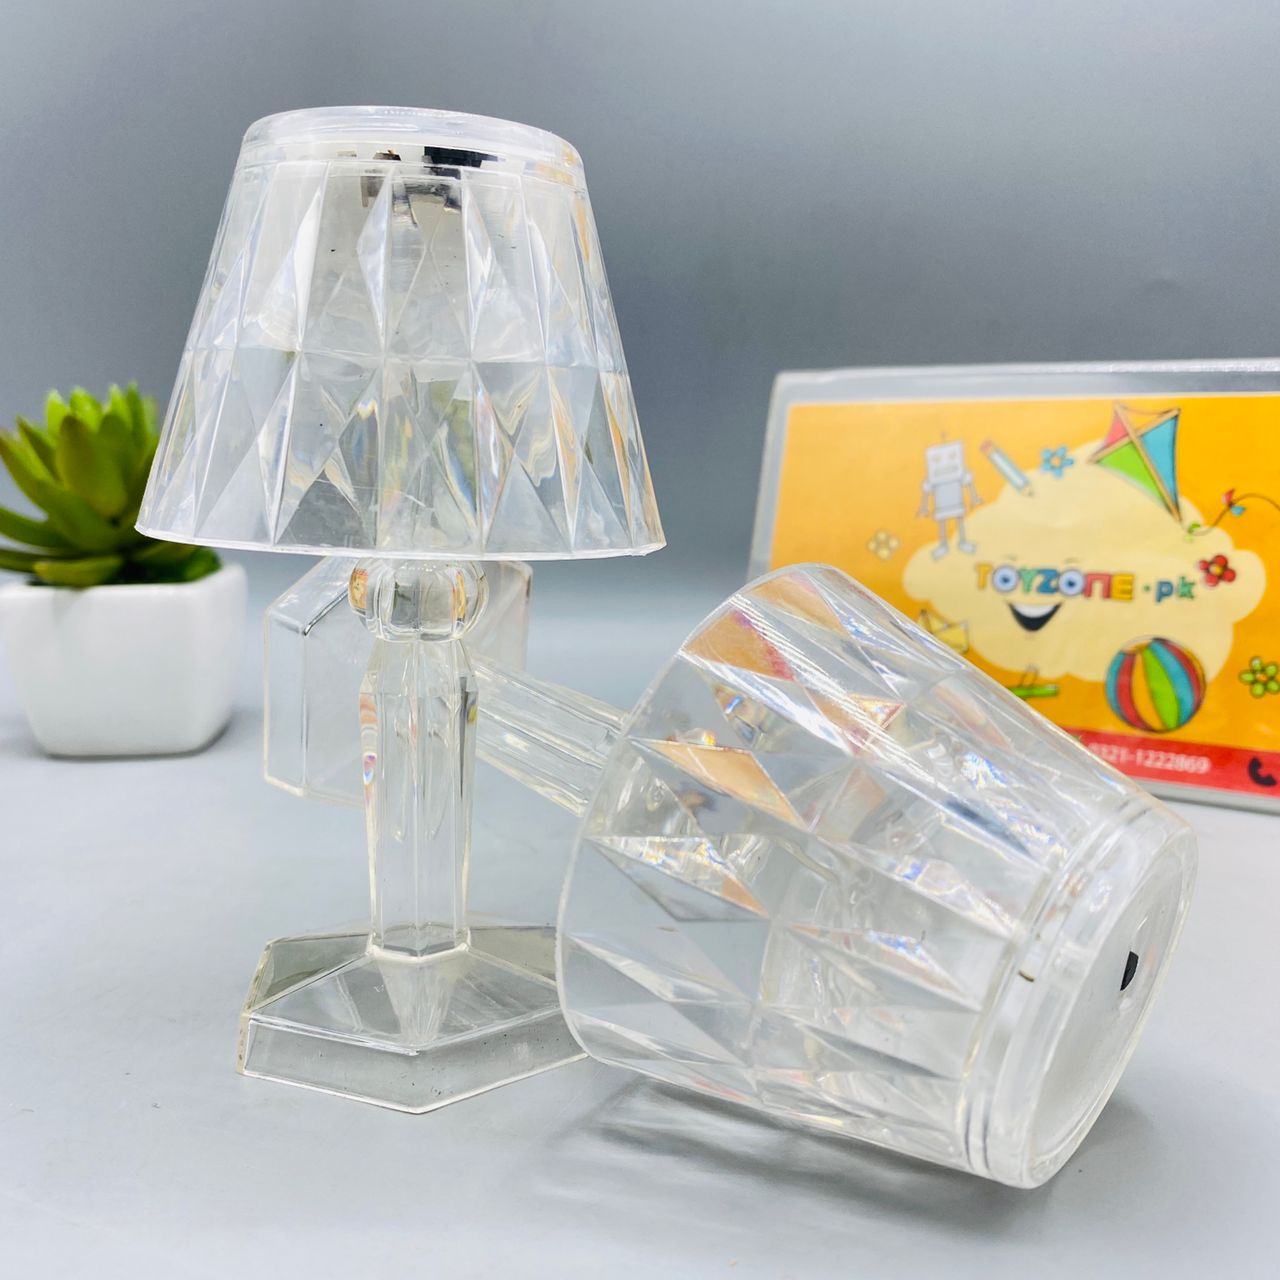 Table Side Lamp (4 inch)